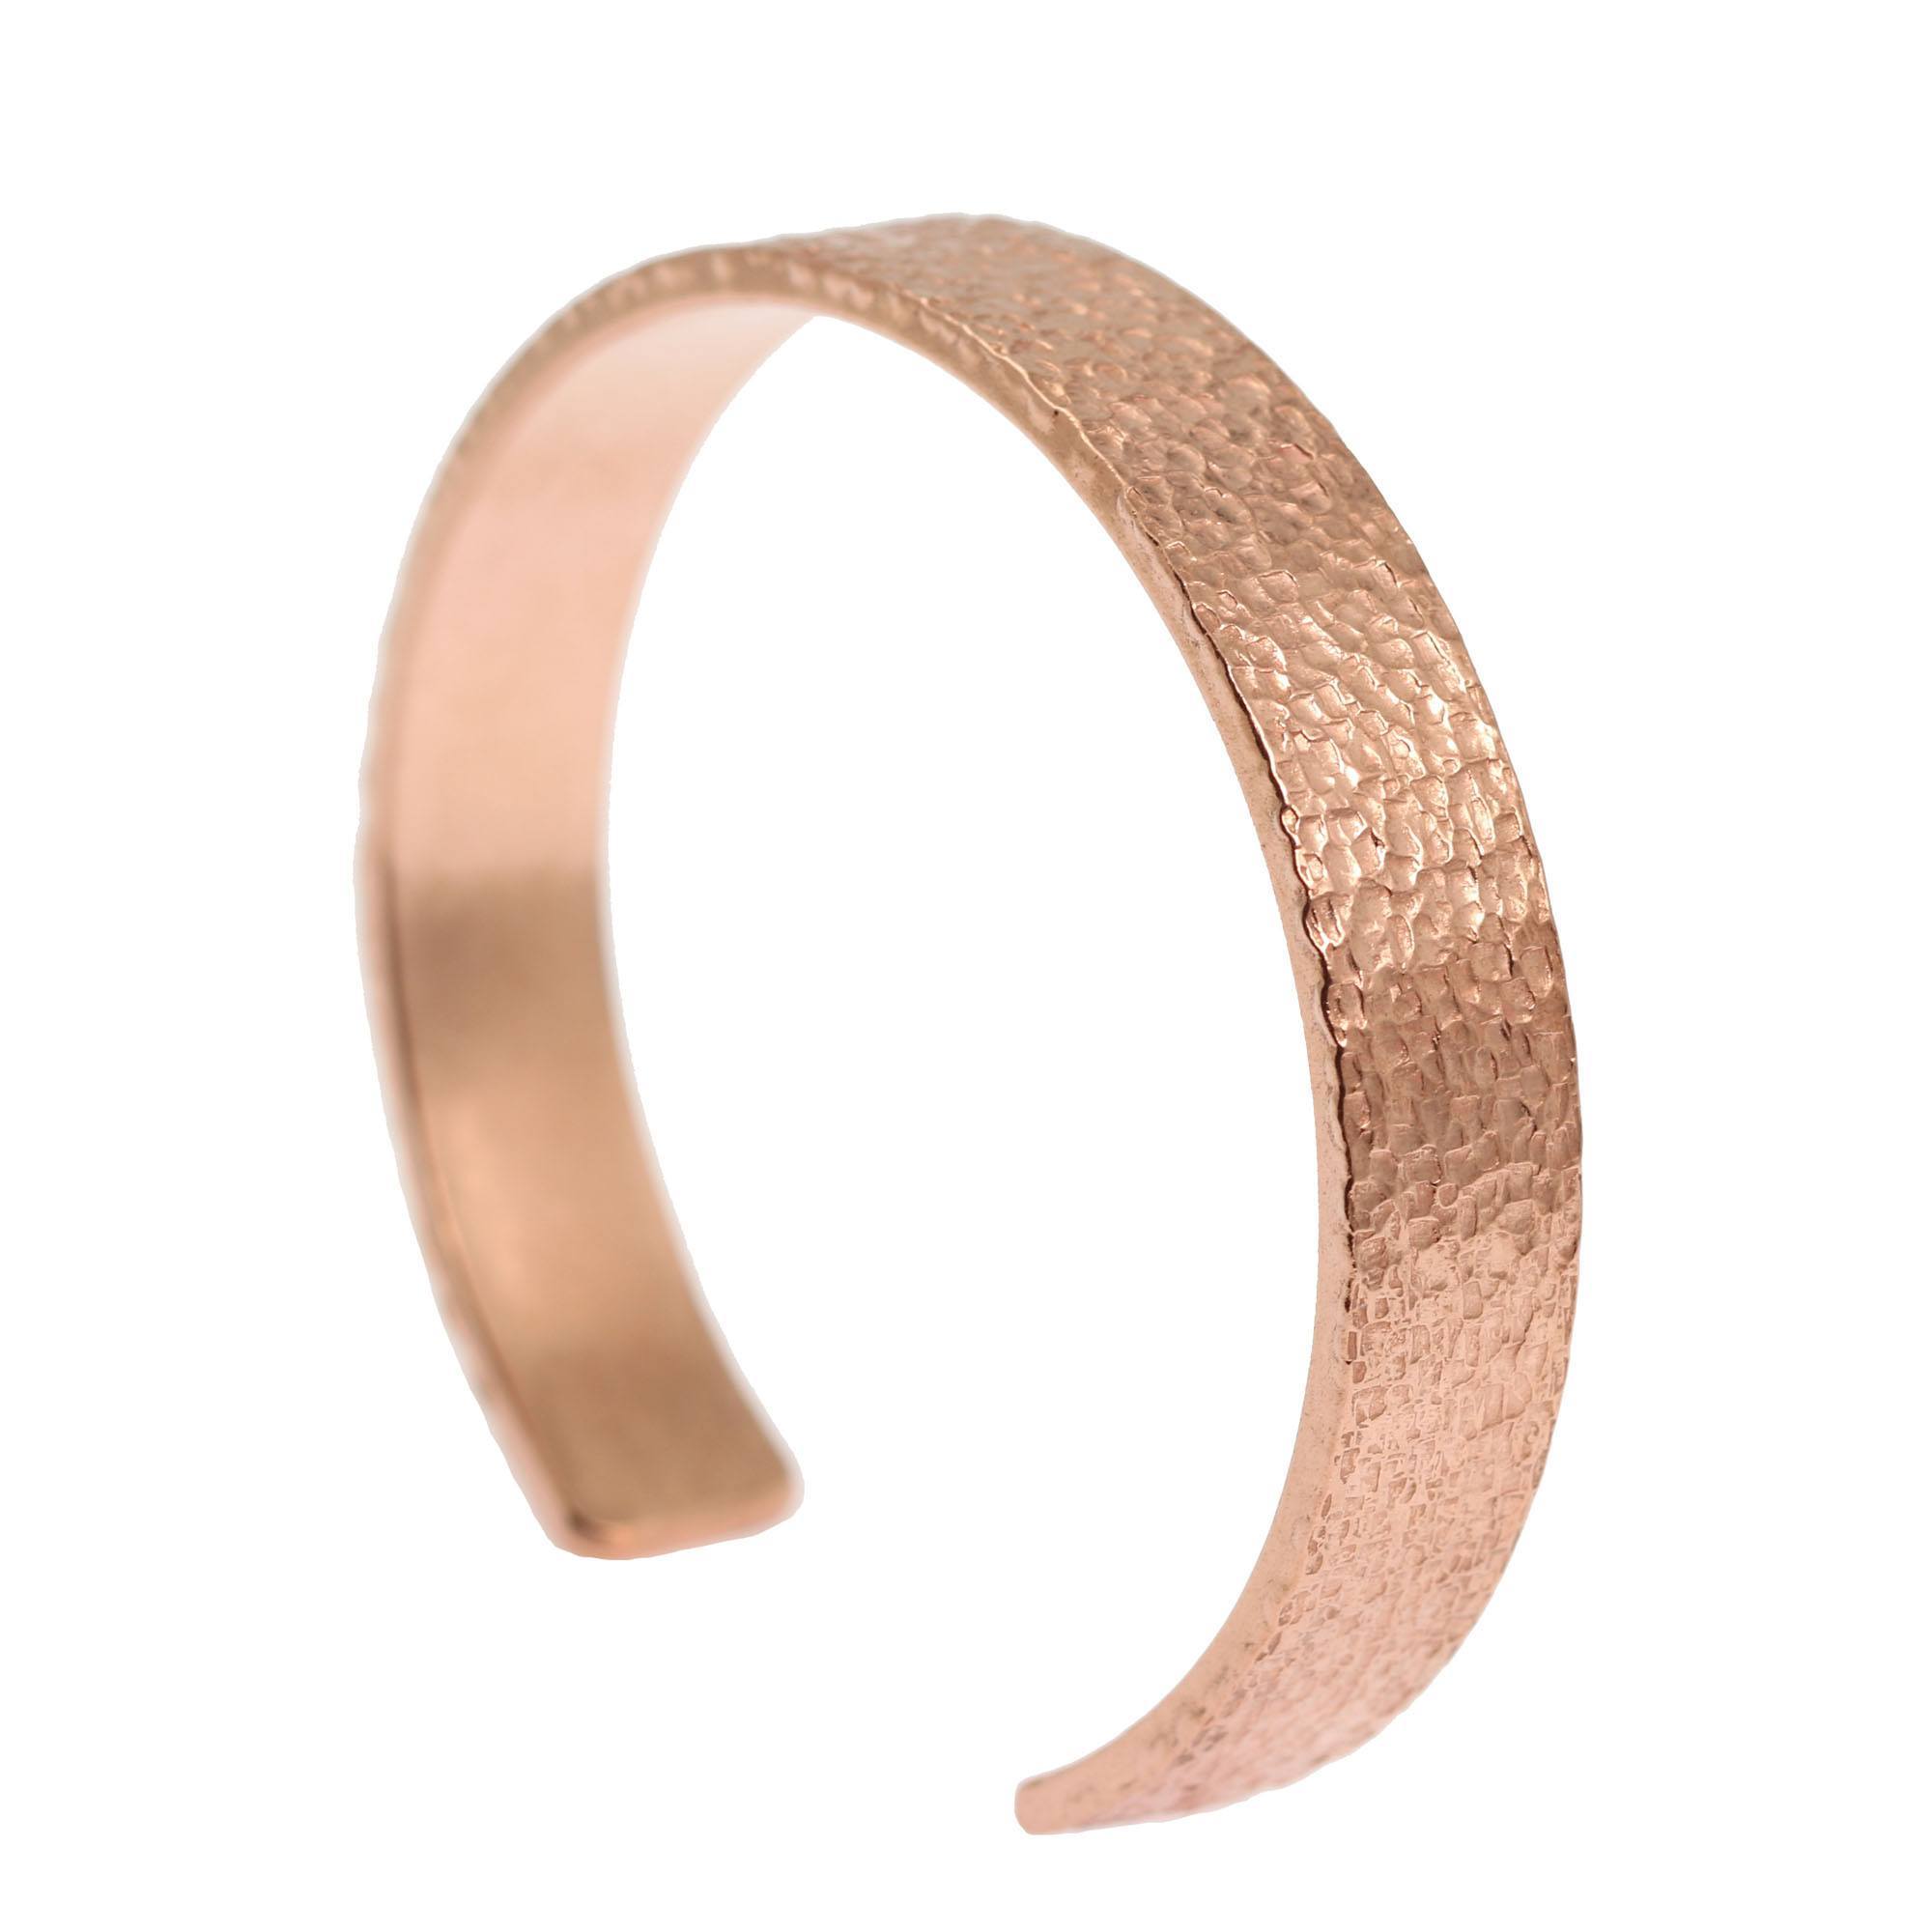 10mm Wide Texturized Copper Cuff Bracelet Right Side View